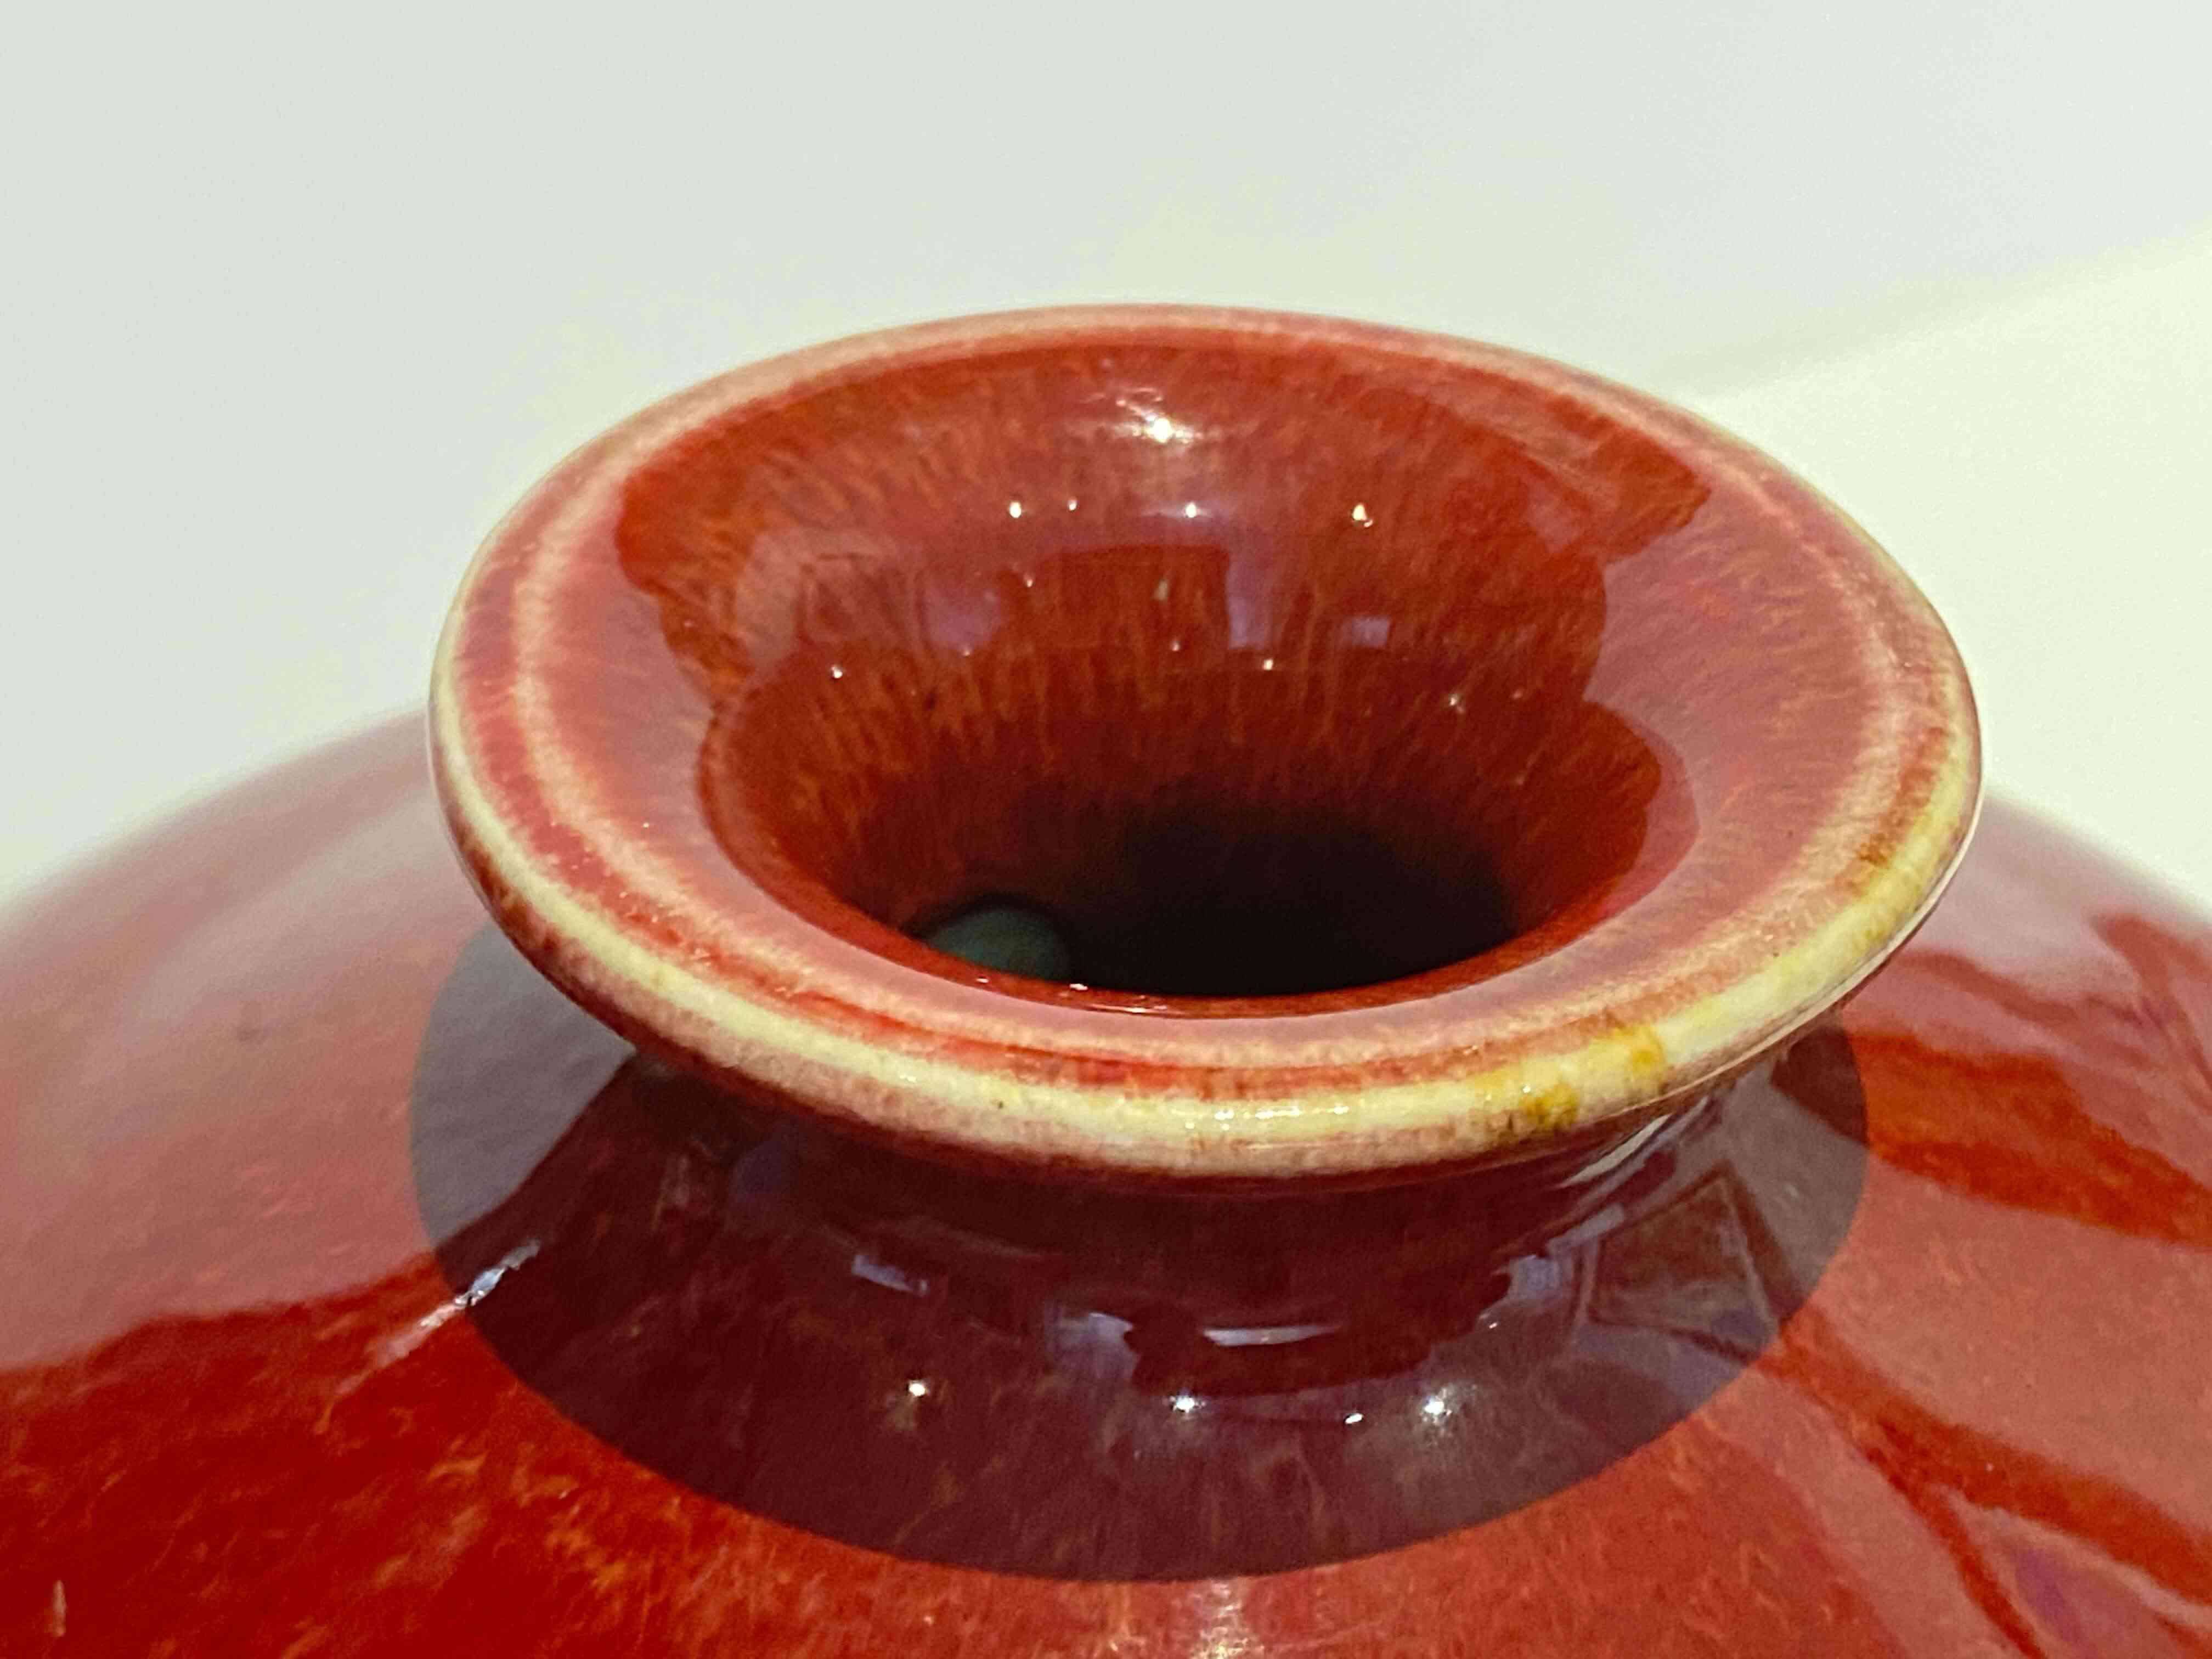 A Chinese red-glazed vase, Meiping, Qing Dynasty, 19th century